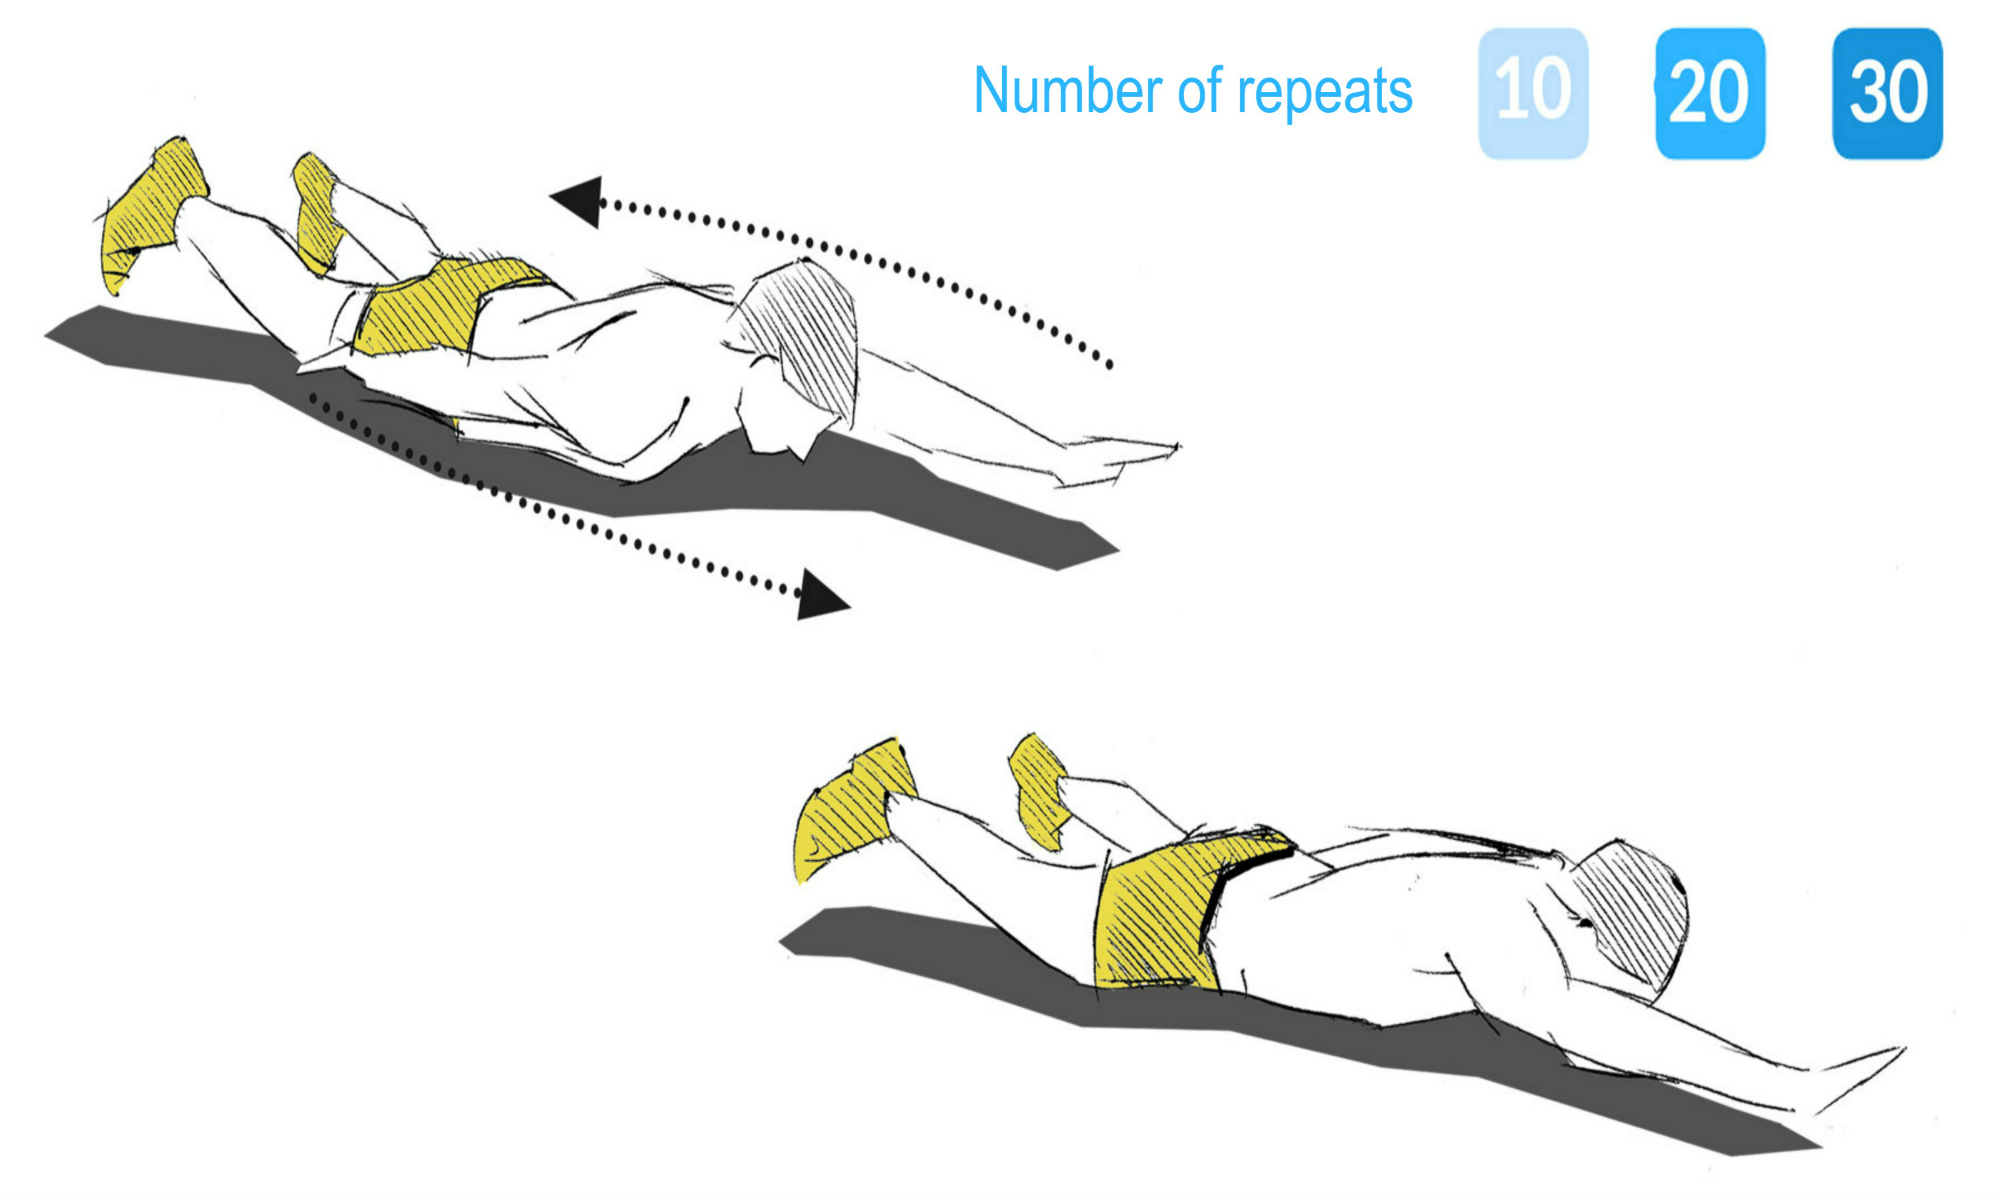 The arm changes exercise.